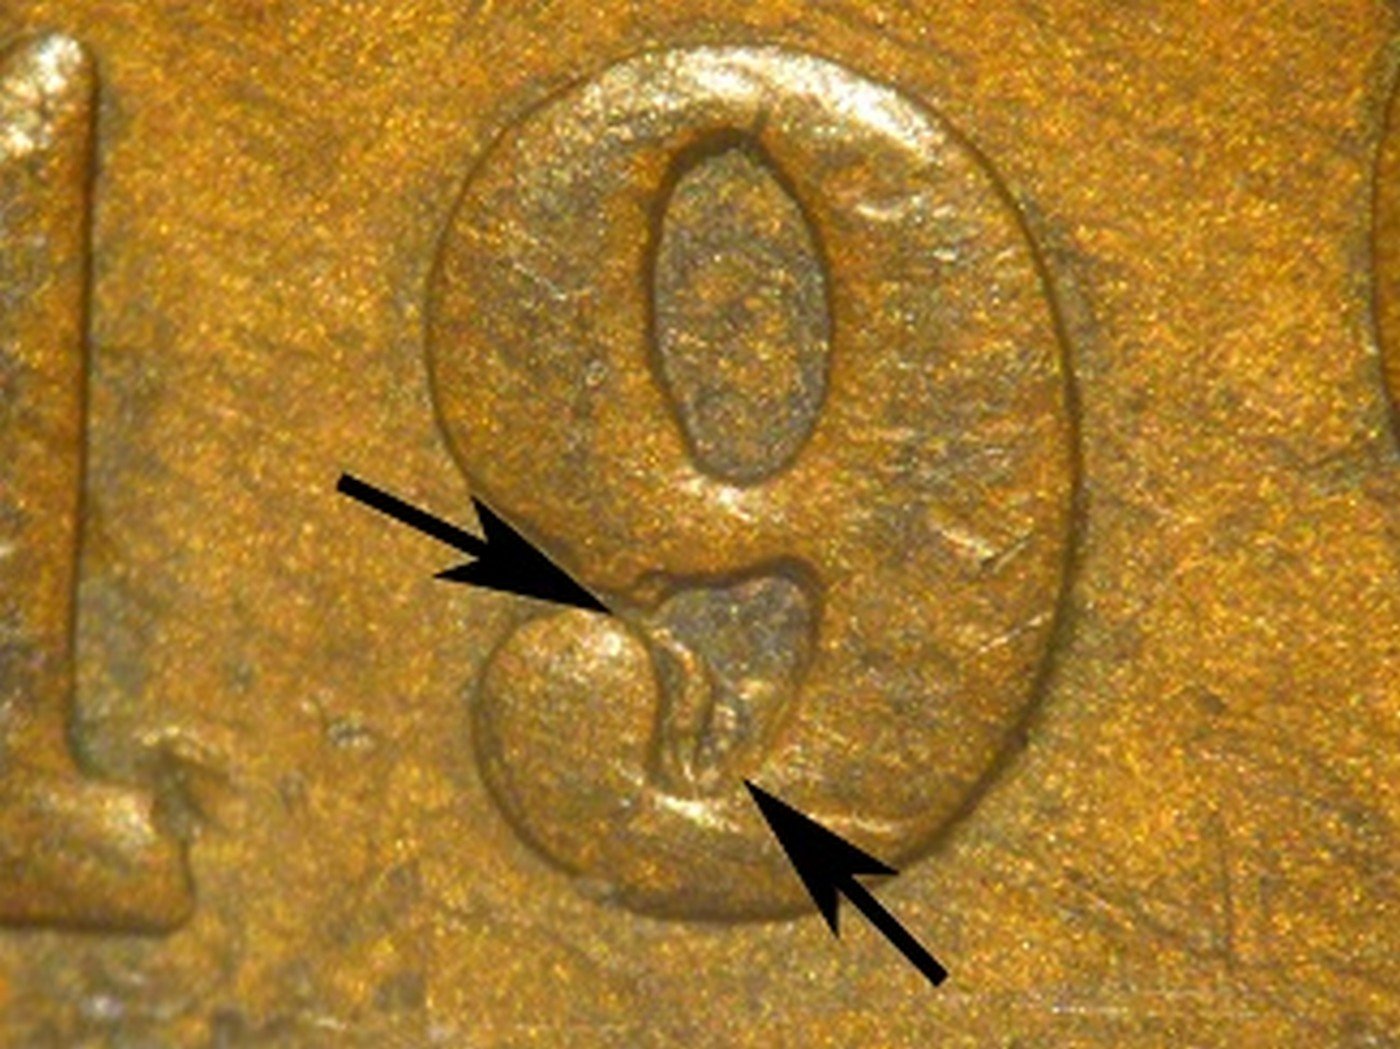 1907 RPD-045 - Indian Head Penny - Photo by David Poliquin